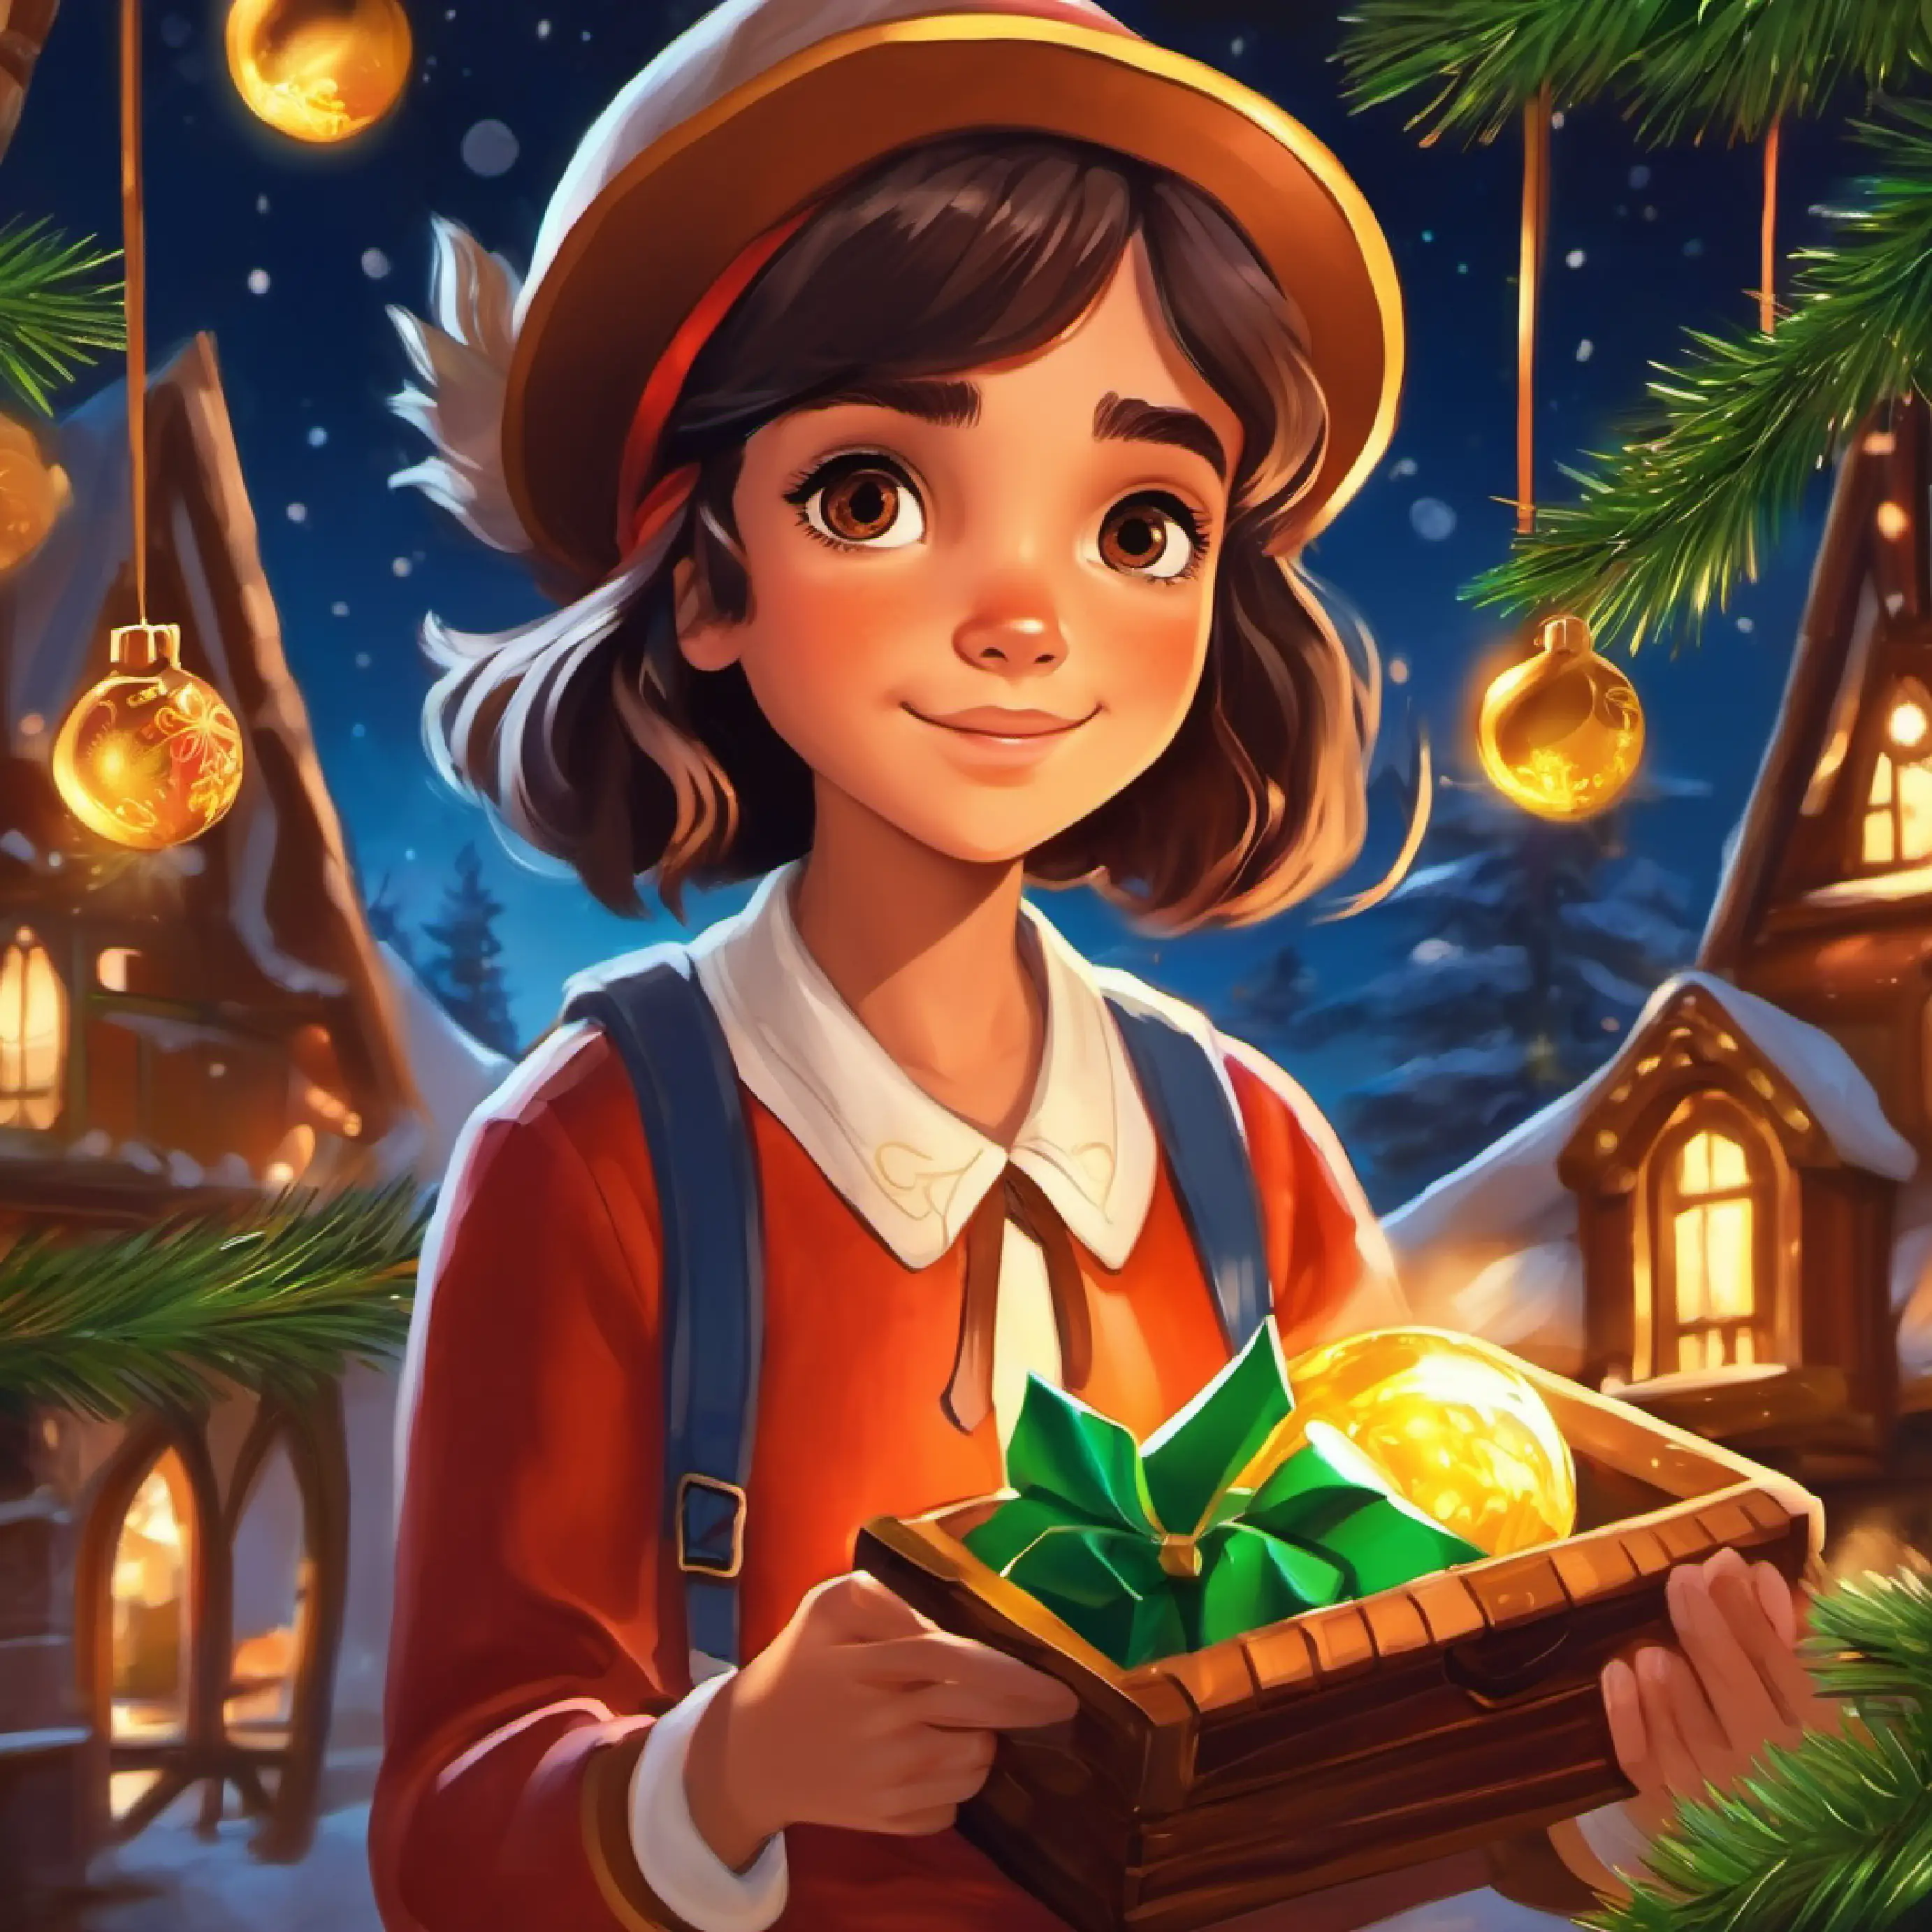 A spirited, curious girl with brown eyes and tanned skin eager for adventures's quick wit unlocks the riddle, hinting at the treasure's closeness.